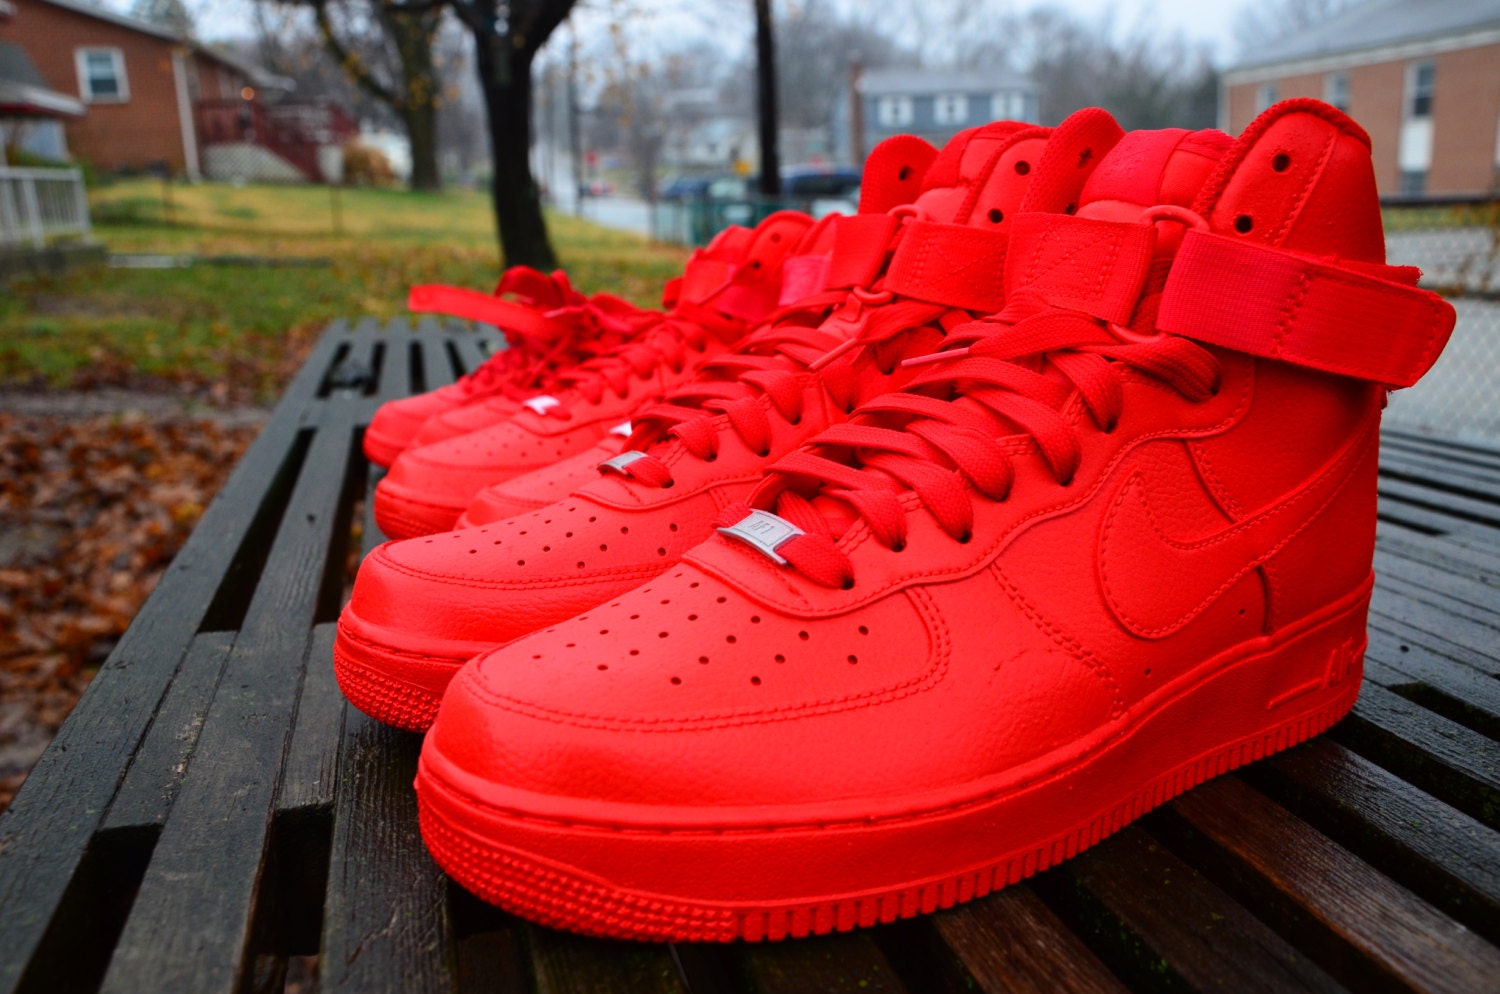 Candy Paint Nike Air Force 1 Customs in All Red by SieratoClothing